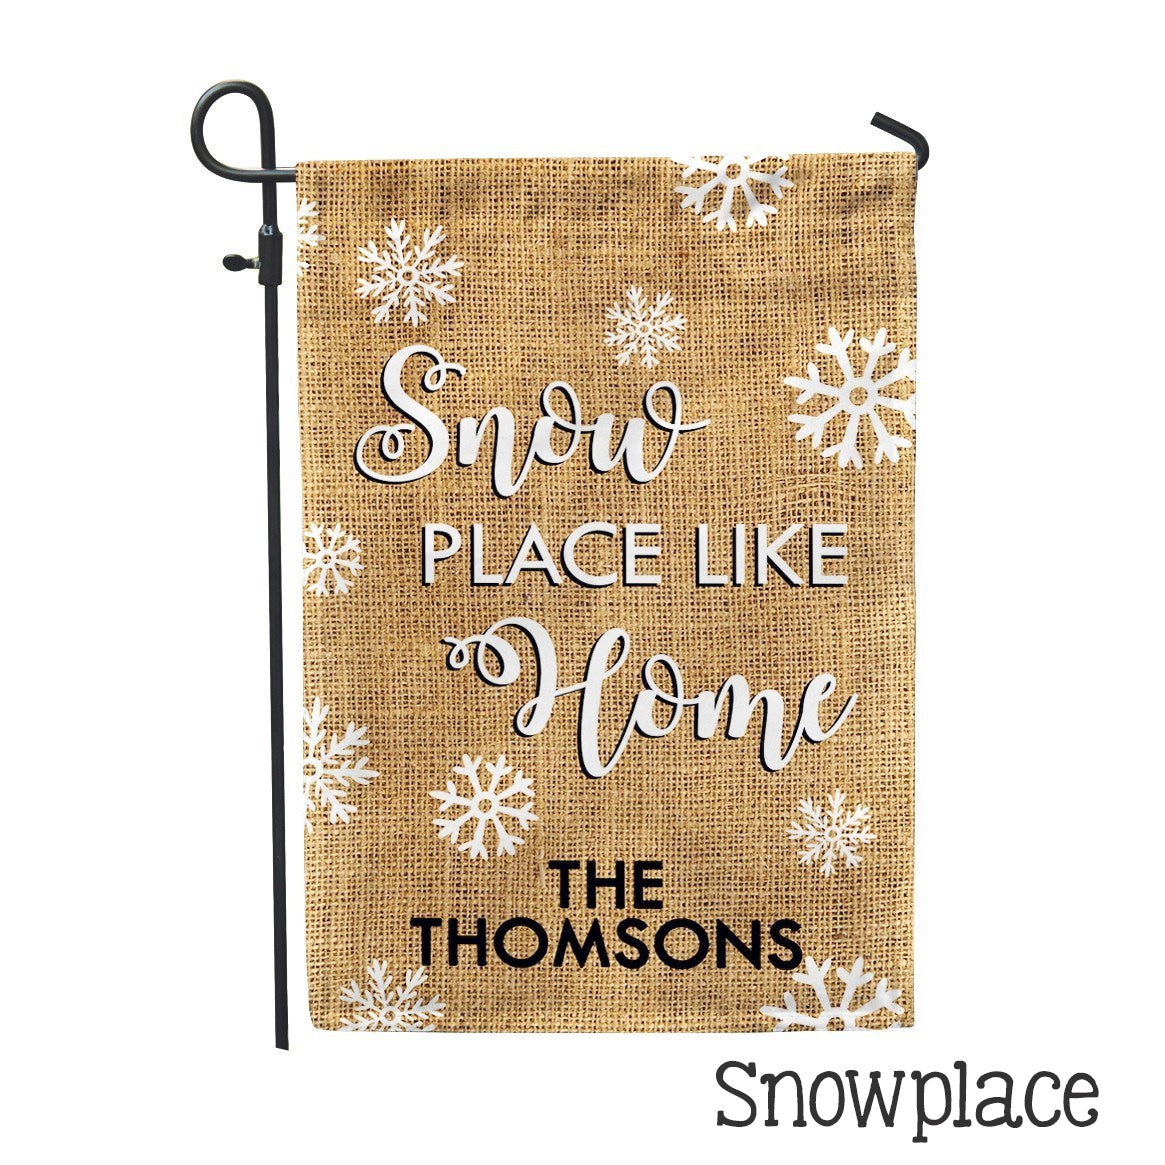 Personalized Garden Flag - Snowplace like Home Custom Flag - 12" x 18" - Second East